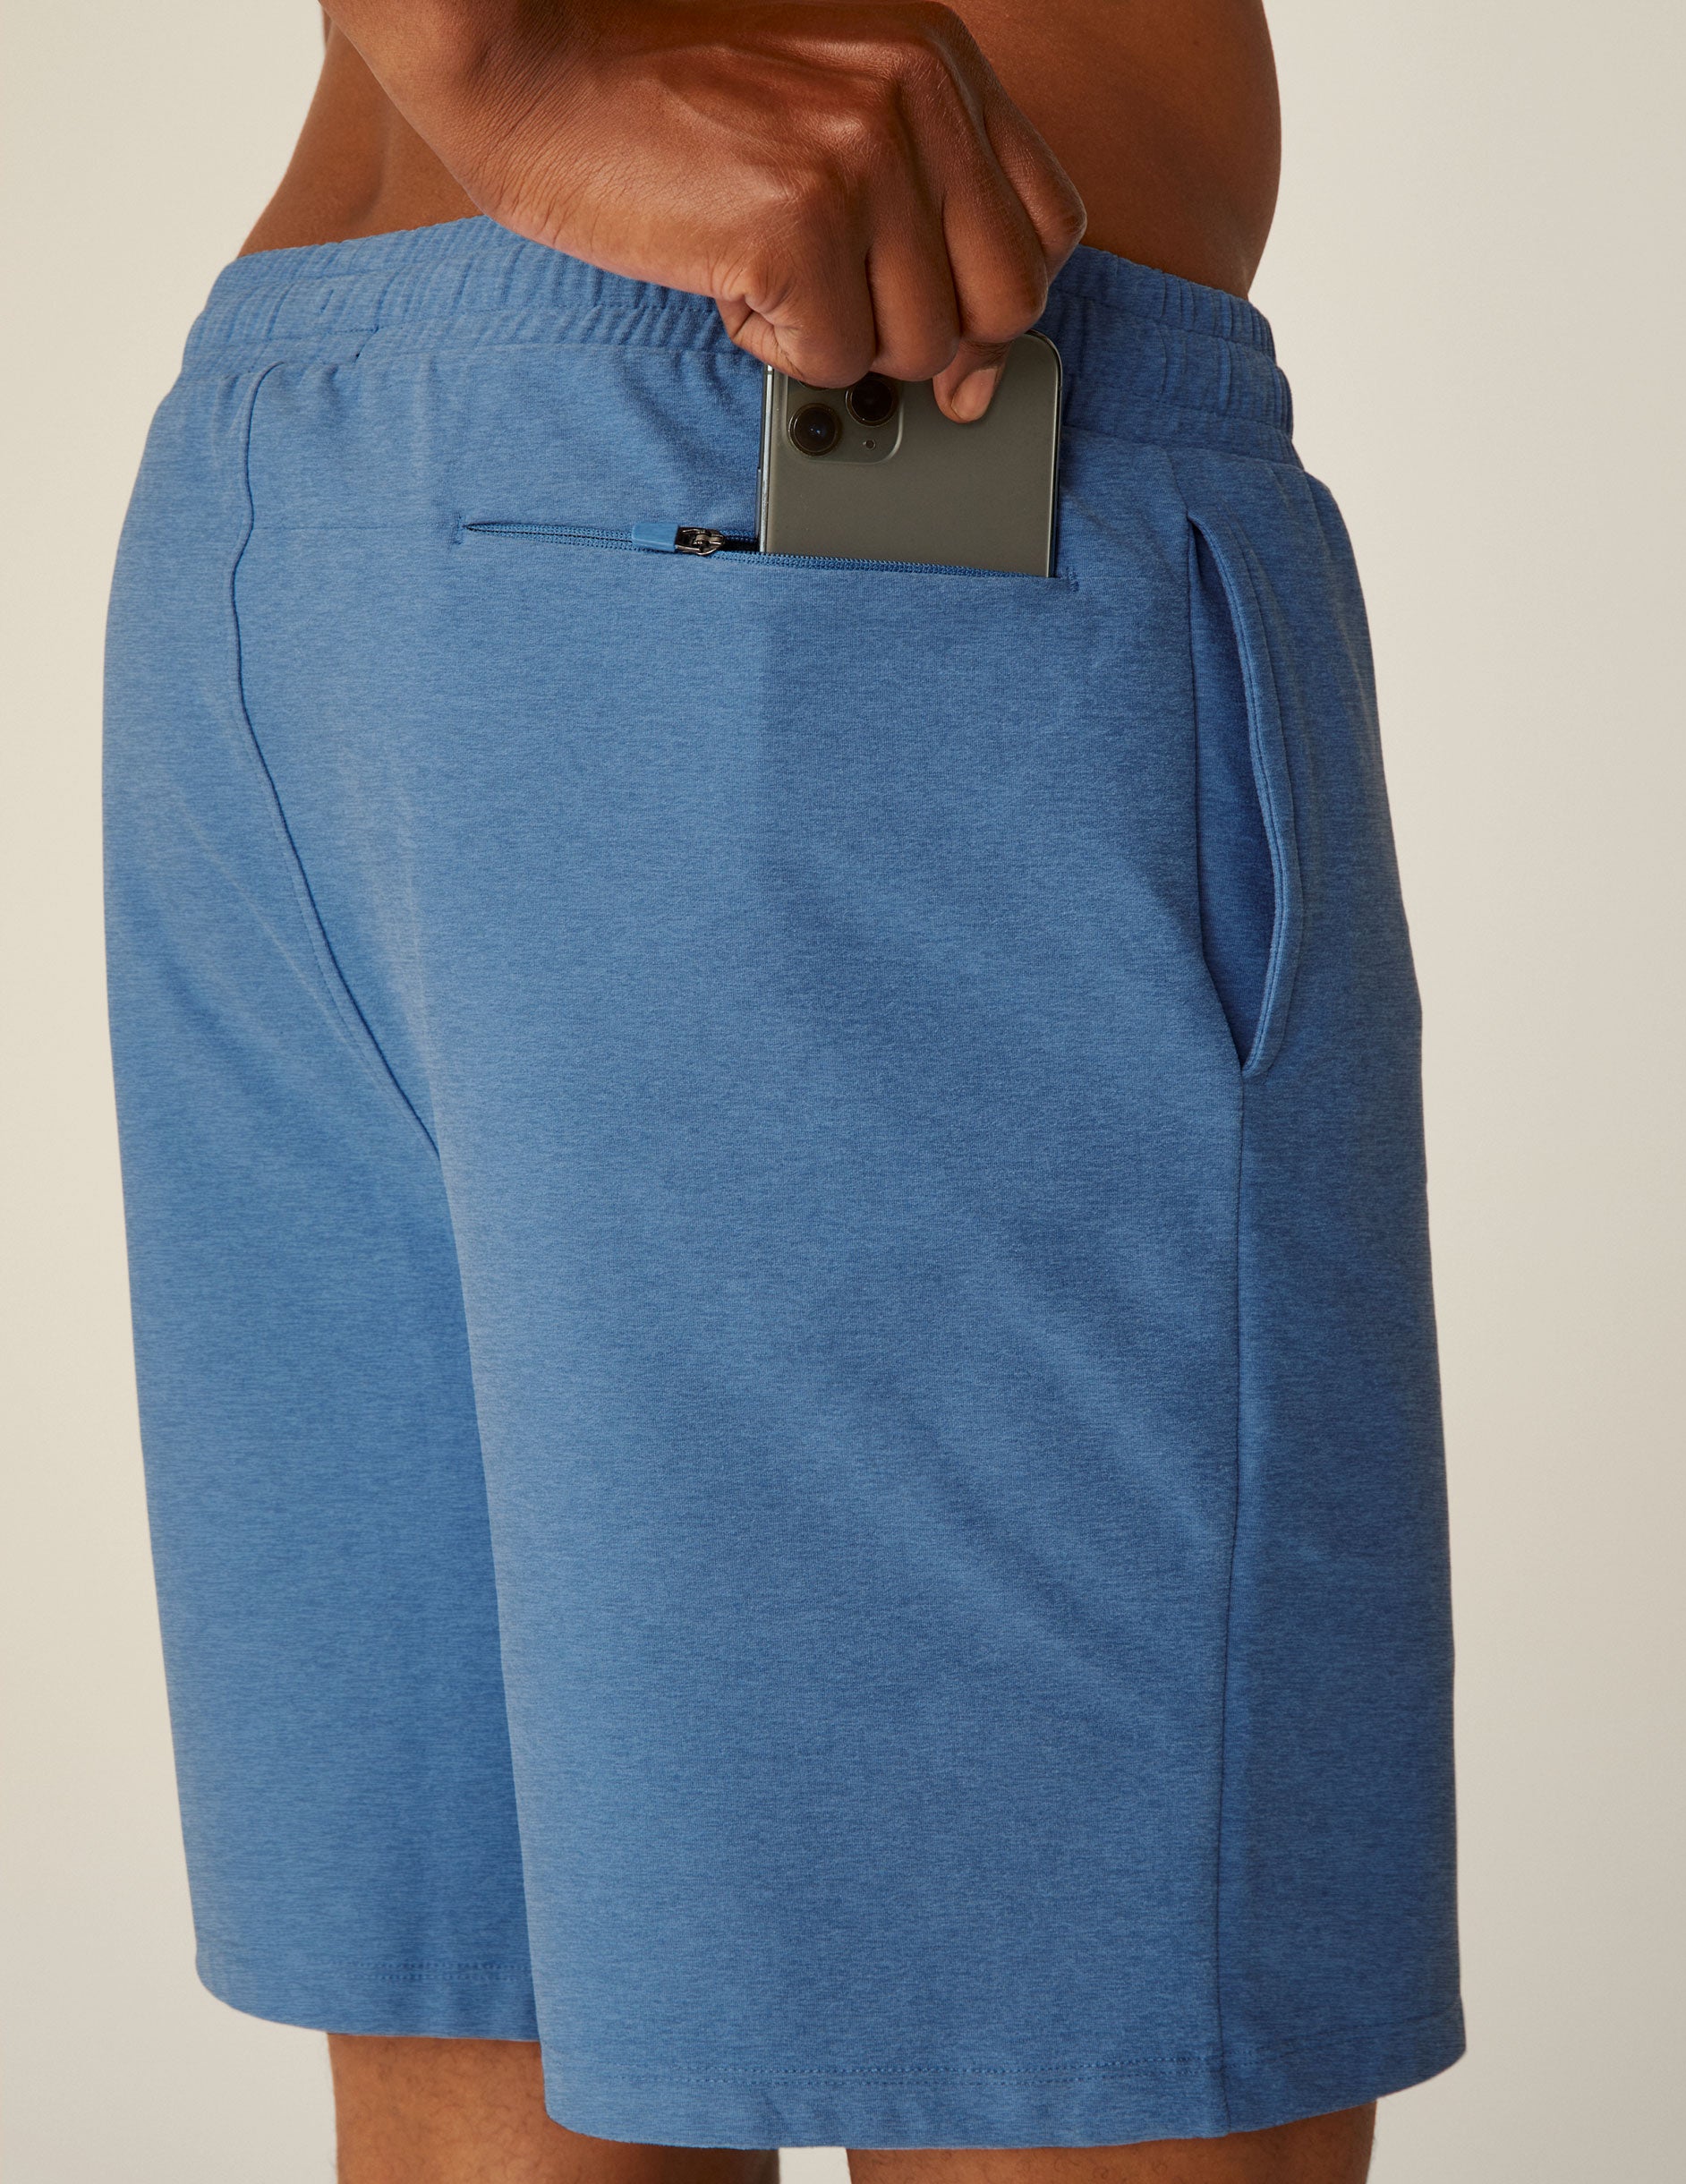 blue men's shorts with pockets. 